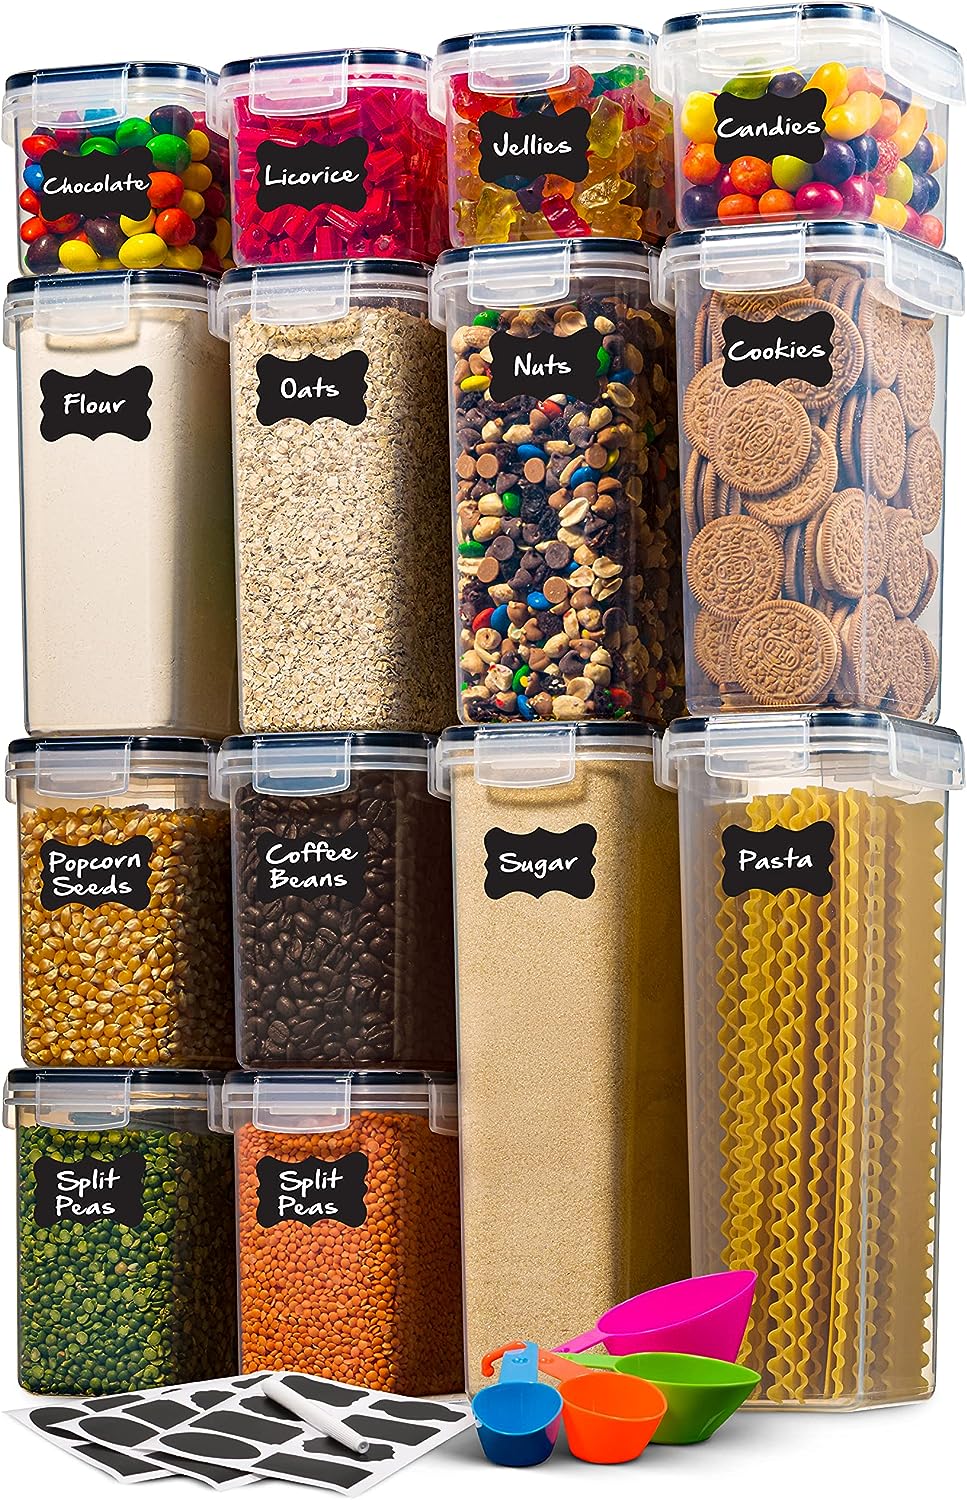 Tiawudi 4 Pk Cereal Containers Storage Set 135.2oz/4L Each, Airtight Food  Storage Containers, Large Cereal Dispenser, Kitchen Pantry Organization